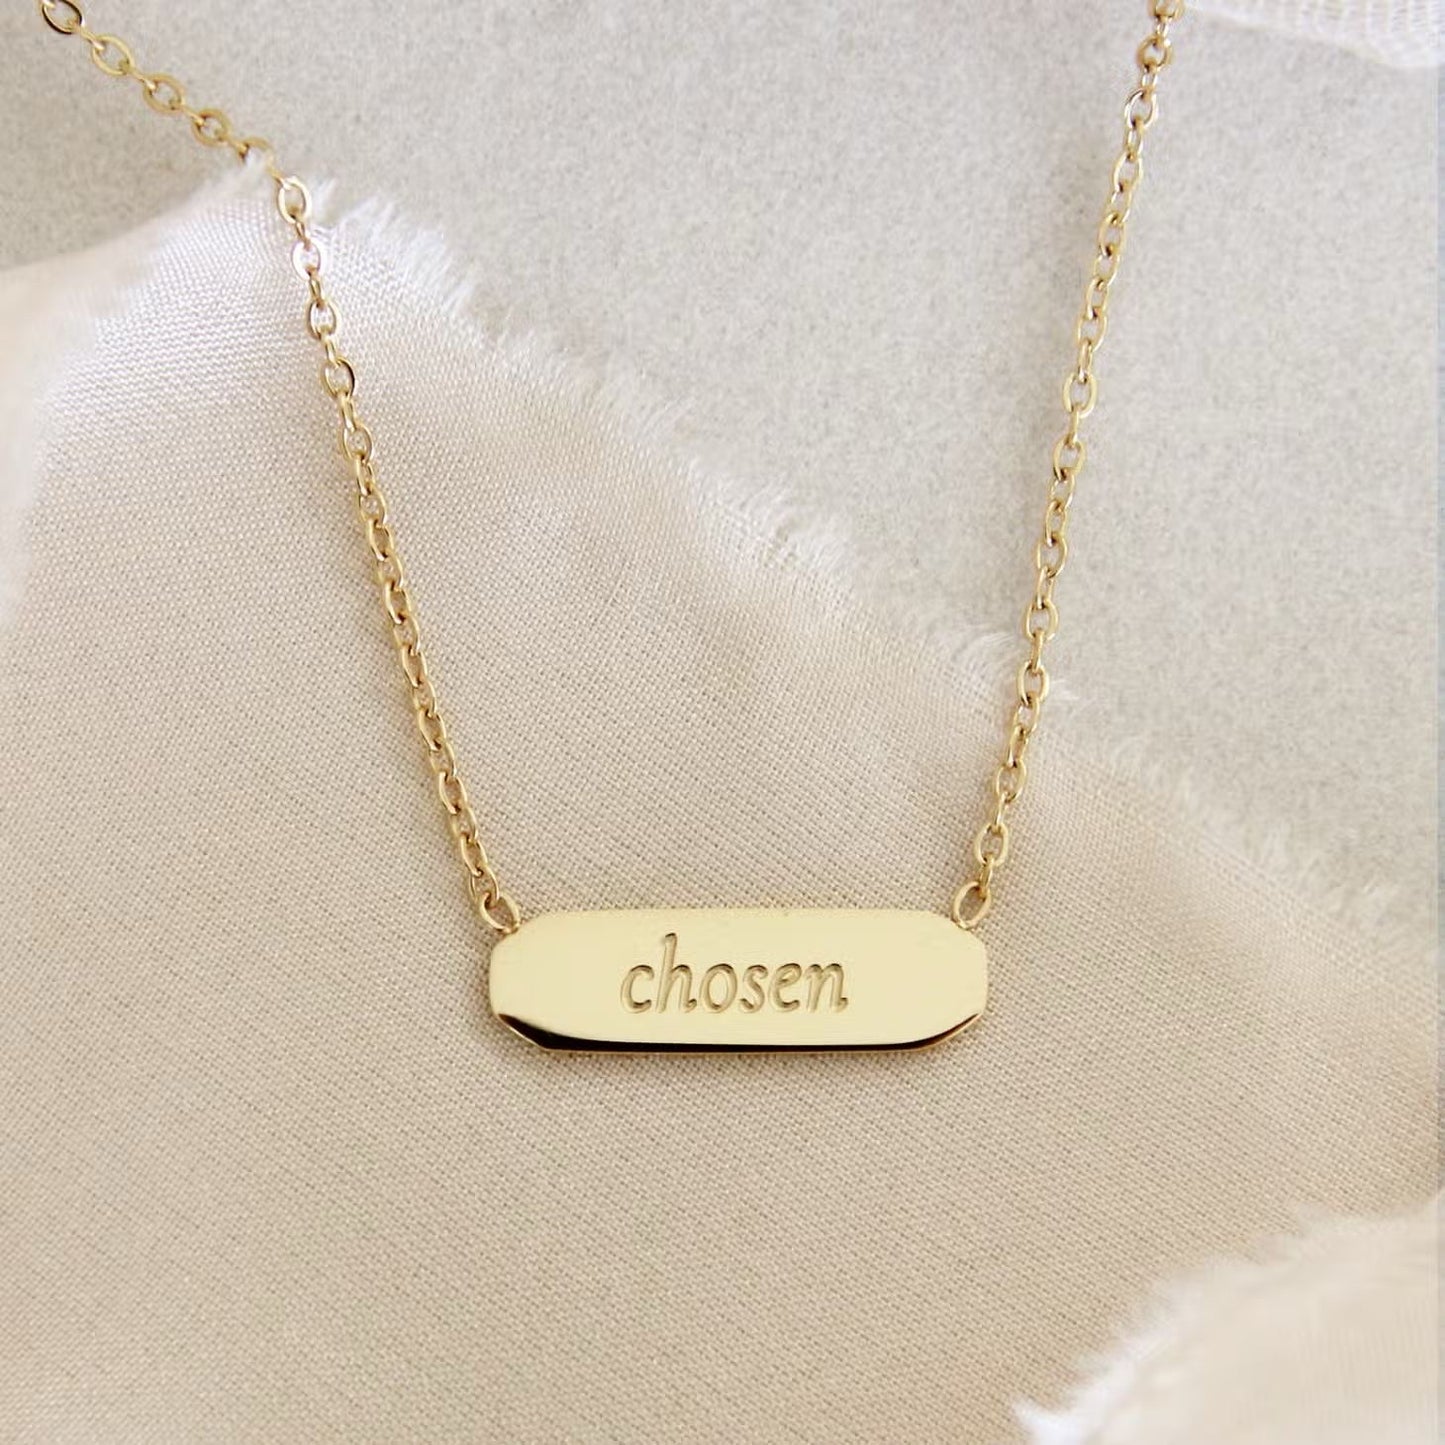 Chosen Plated Necklace